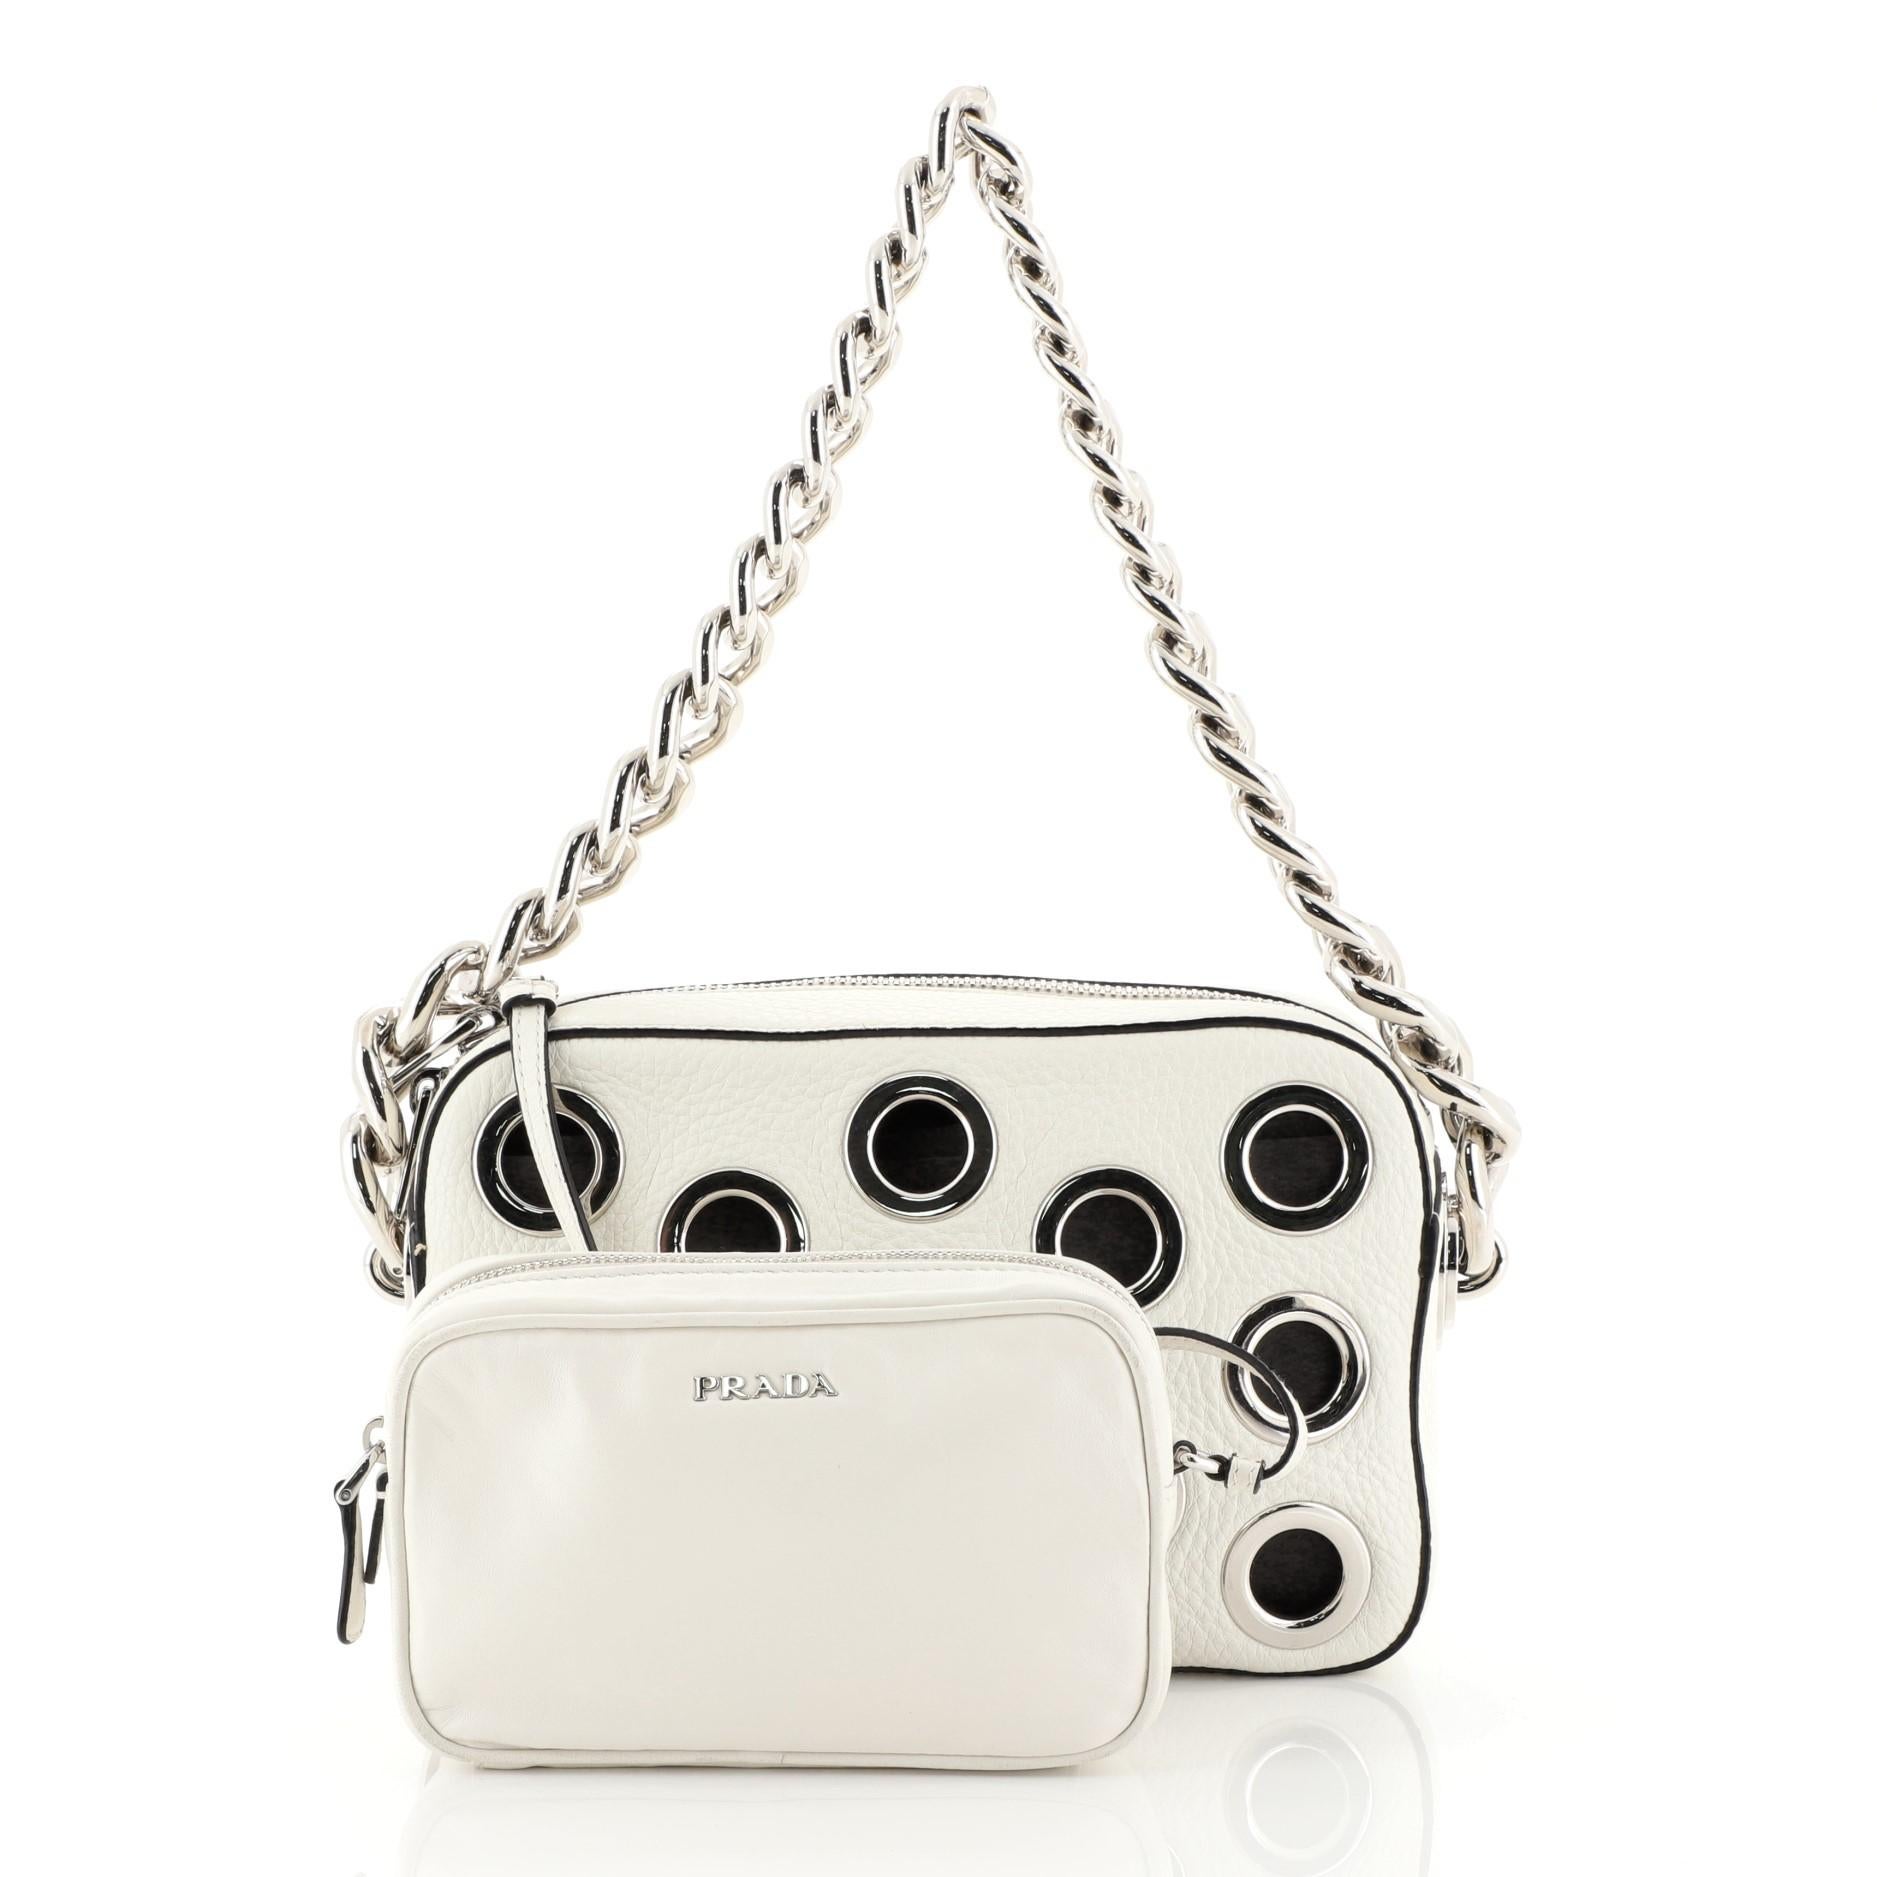 This Prada Grommet Chain Shoulder Bag Vitello Daino Small, crafted from white vitello daino leather, features chain link straps, large grommets detailing all throughout, and silver-tone hardware. Its zip closure opens to a white leather interior.